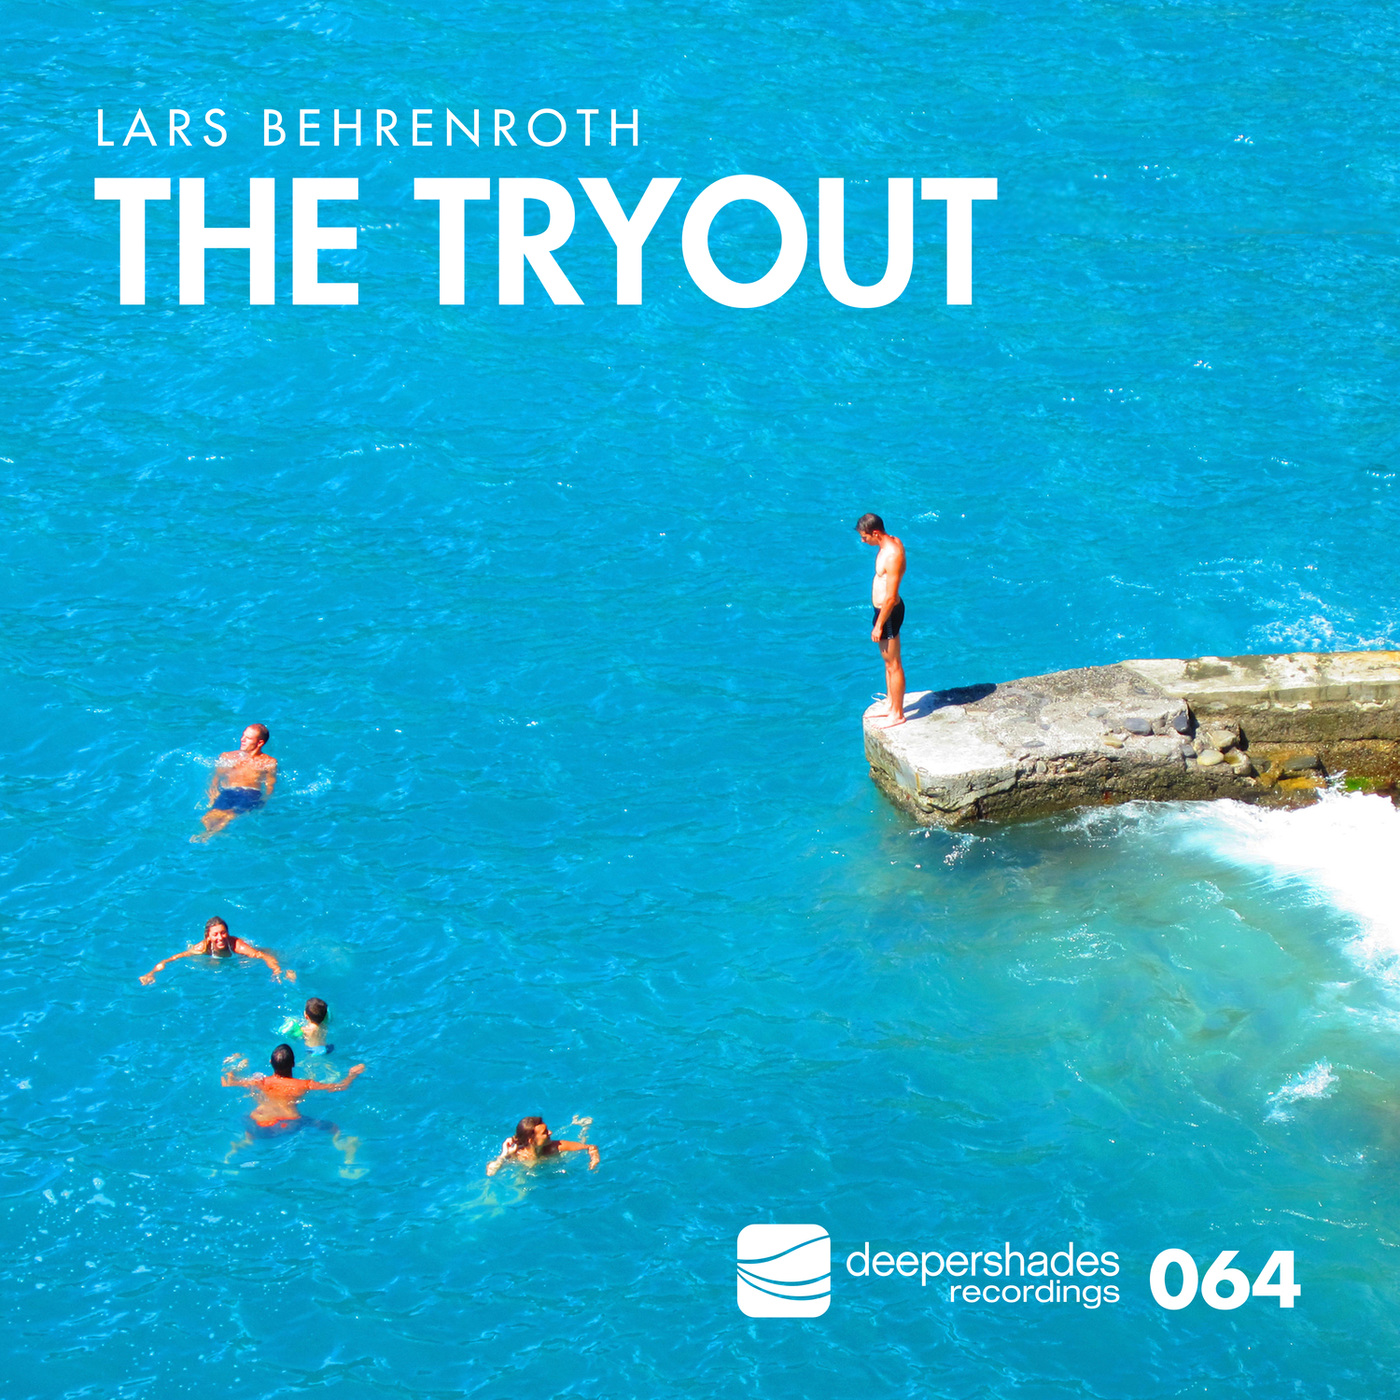 Lars Behrenroth - The Tryout / Deeper Shades Recordings